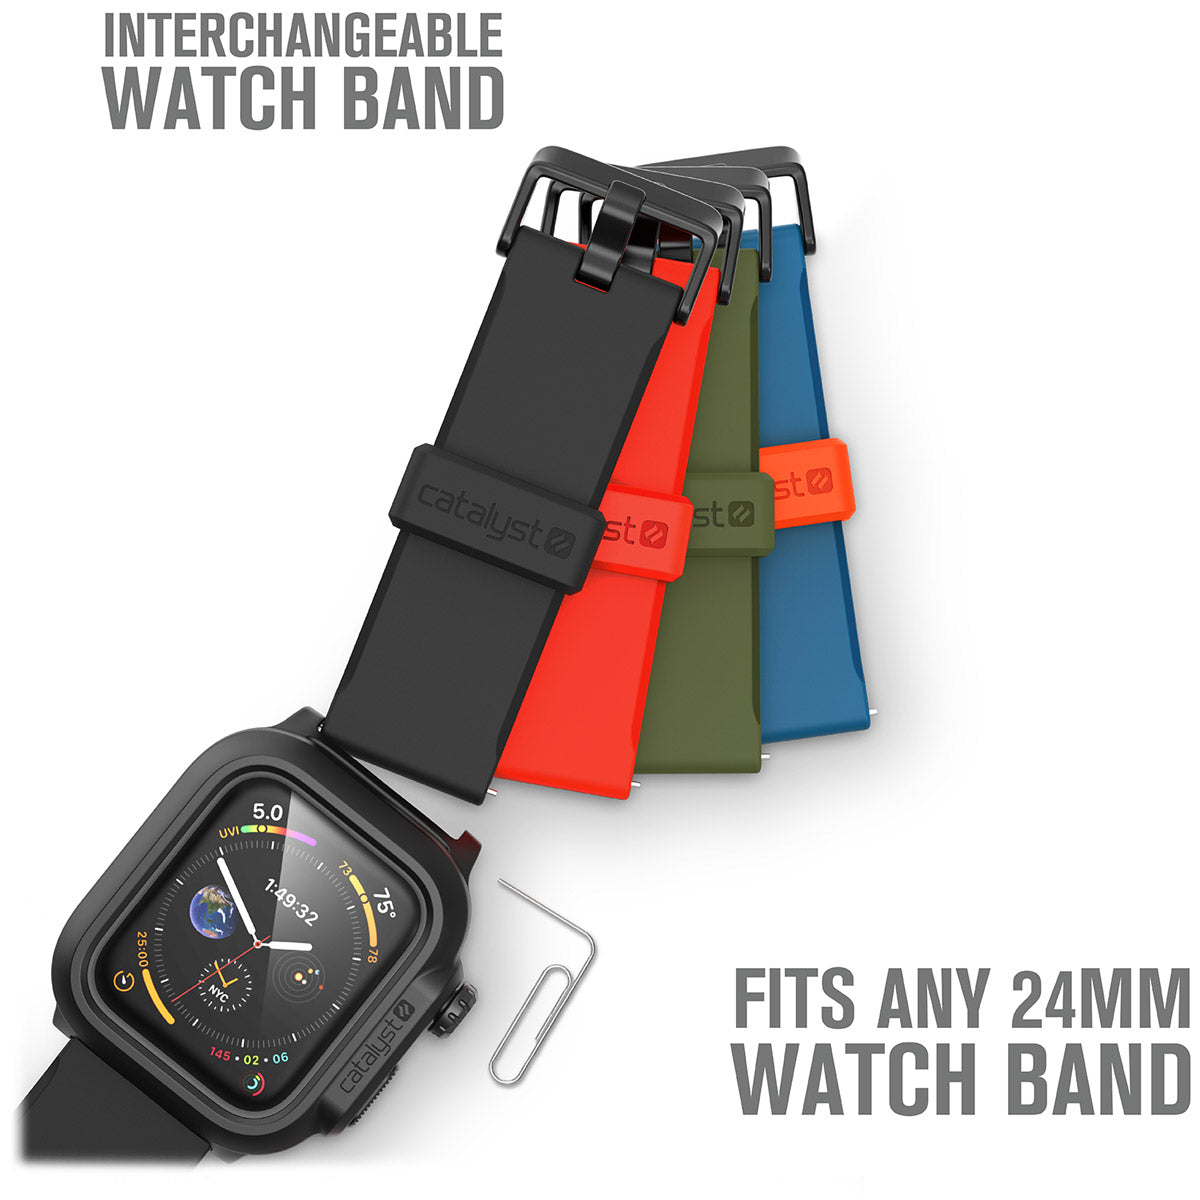 catalyst apple watch series 6 5 4 se gen 2 1 40mm 44mm waterproof case band showing the catalyst case paper clip black red green blue bands text reads interchangeable watch band fits any 24mm watch band